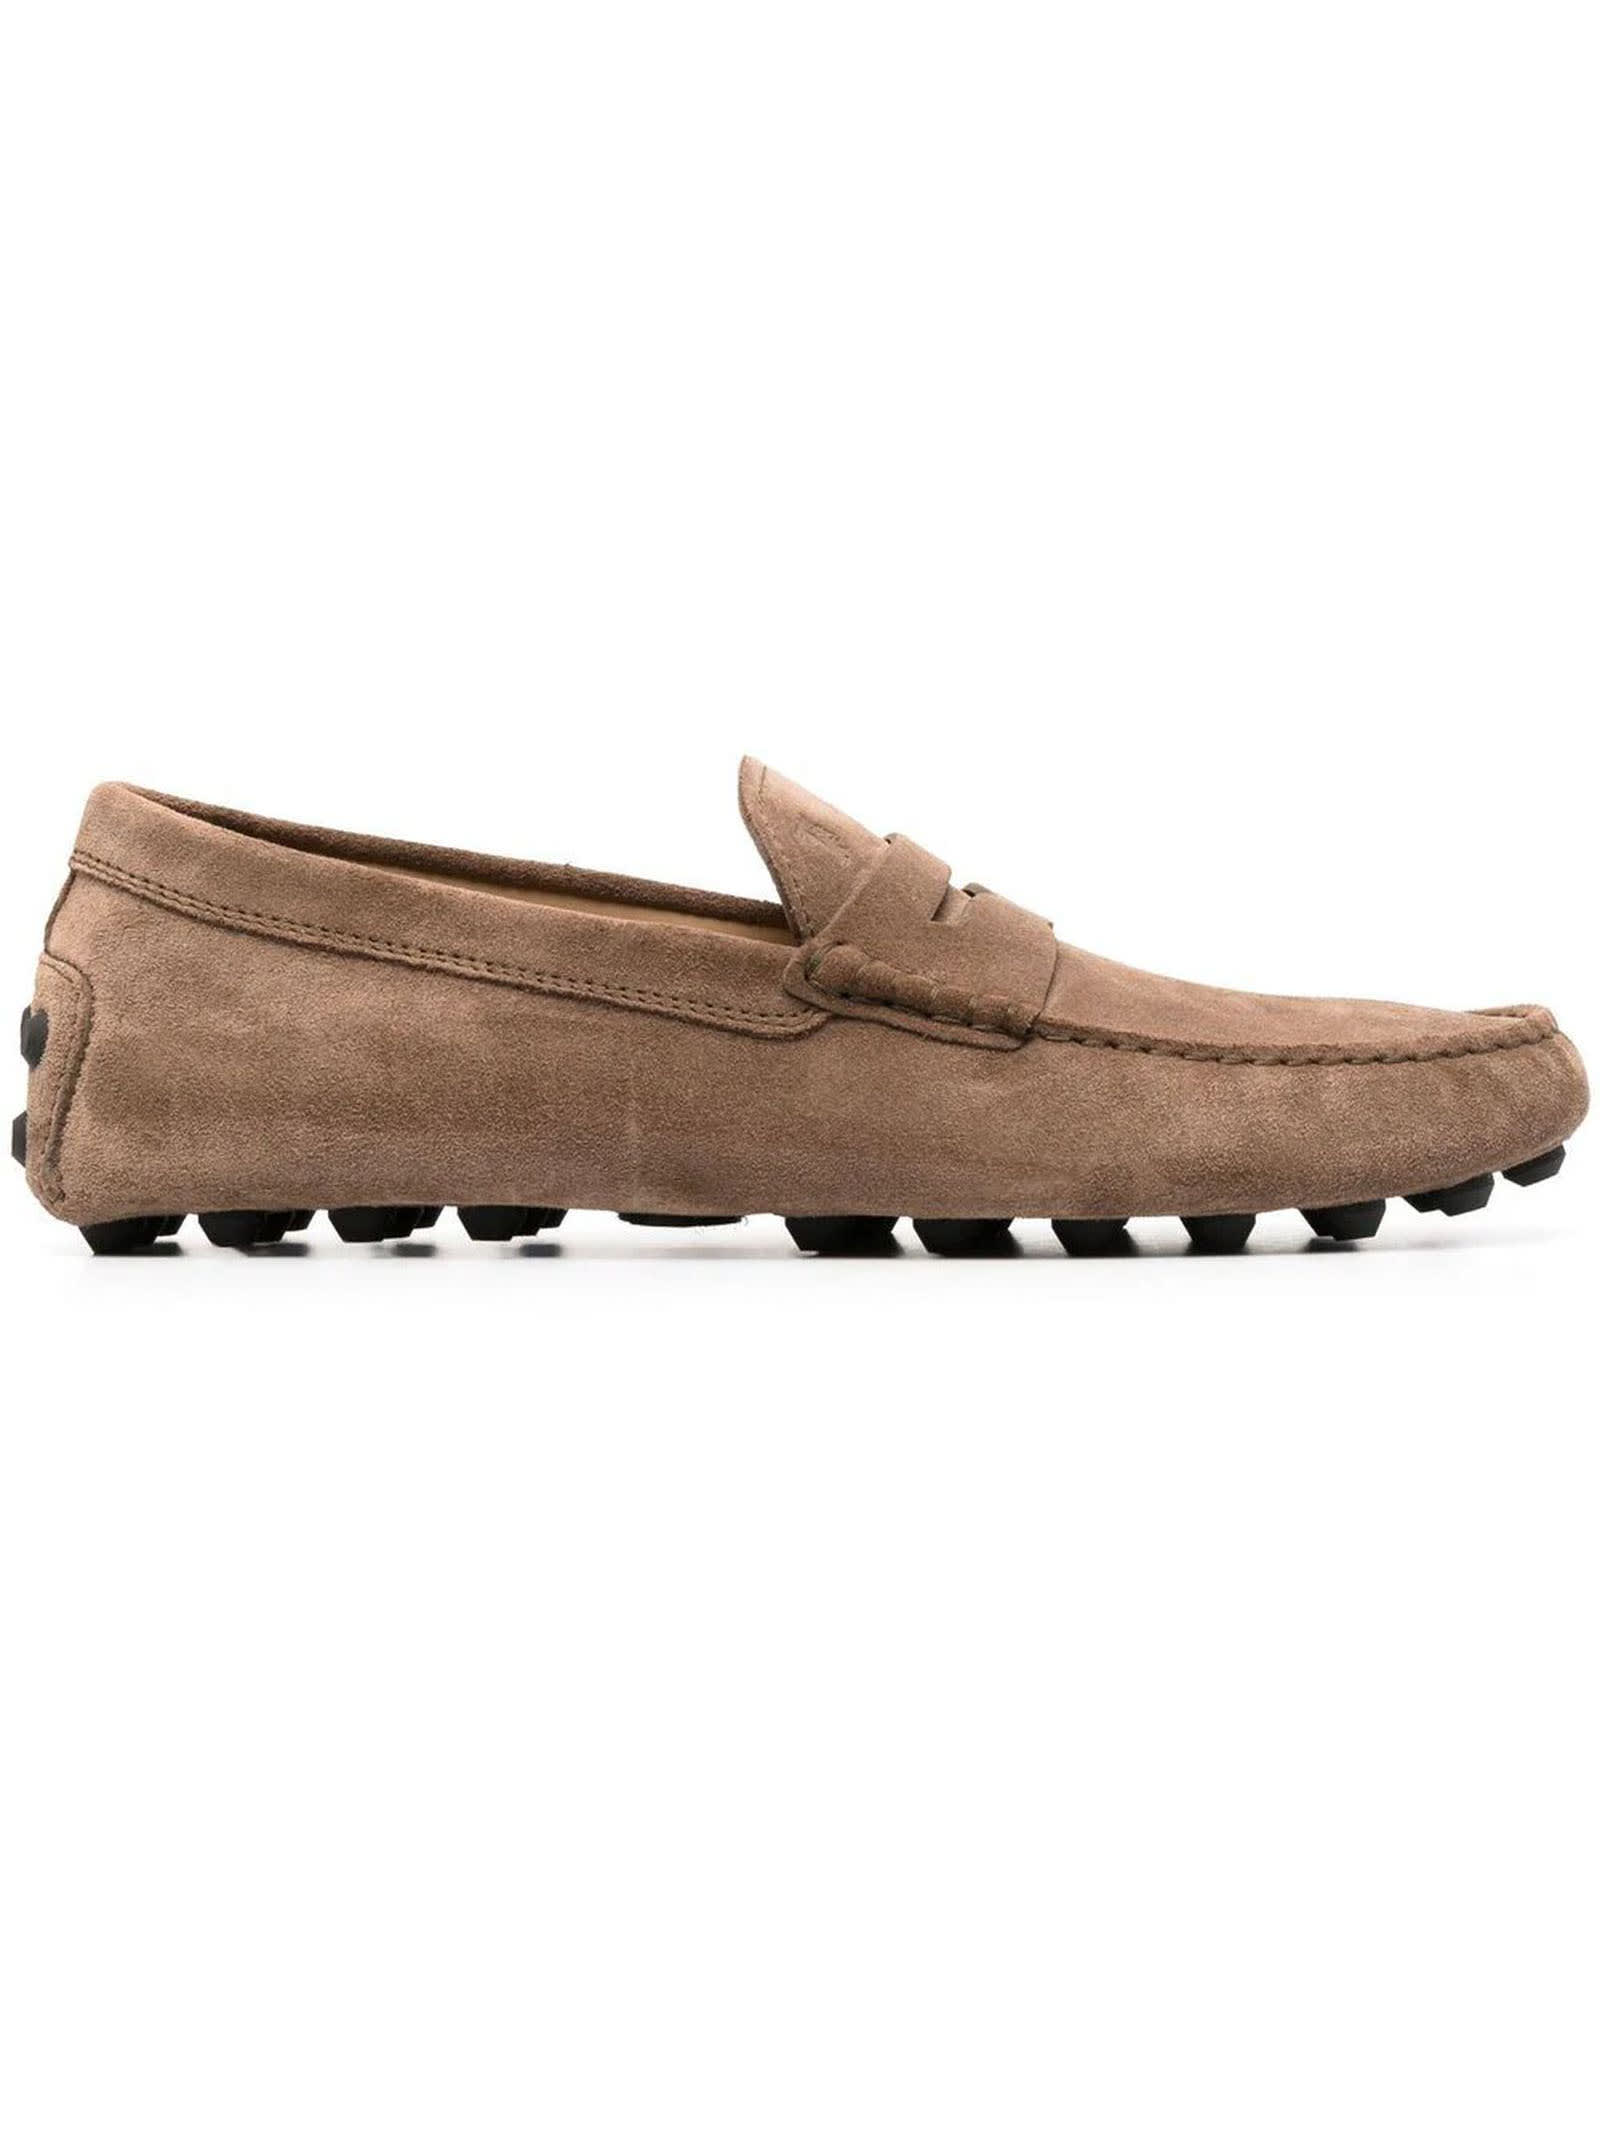 Tods Flat Shoes Brown